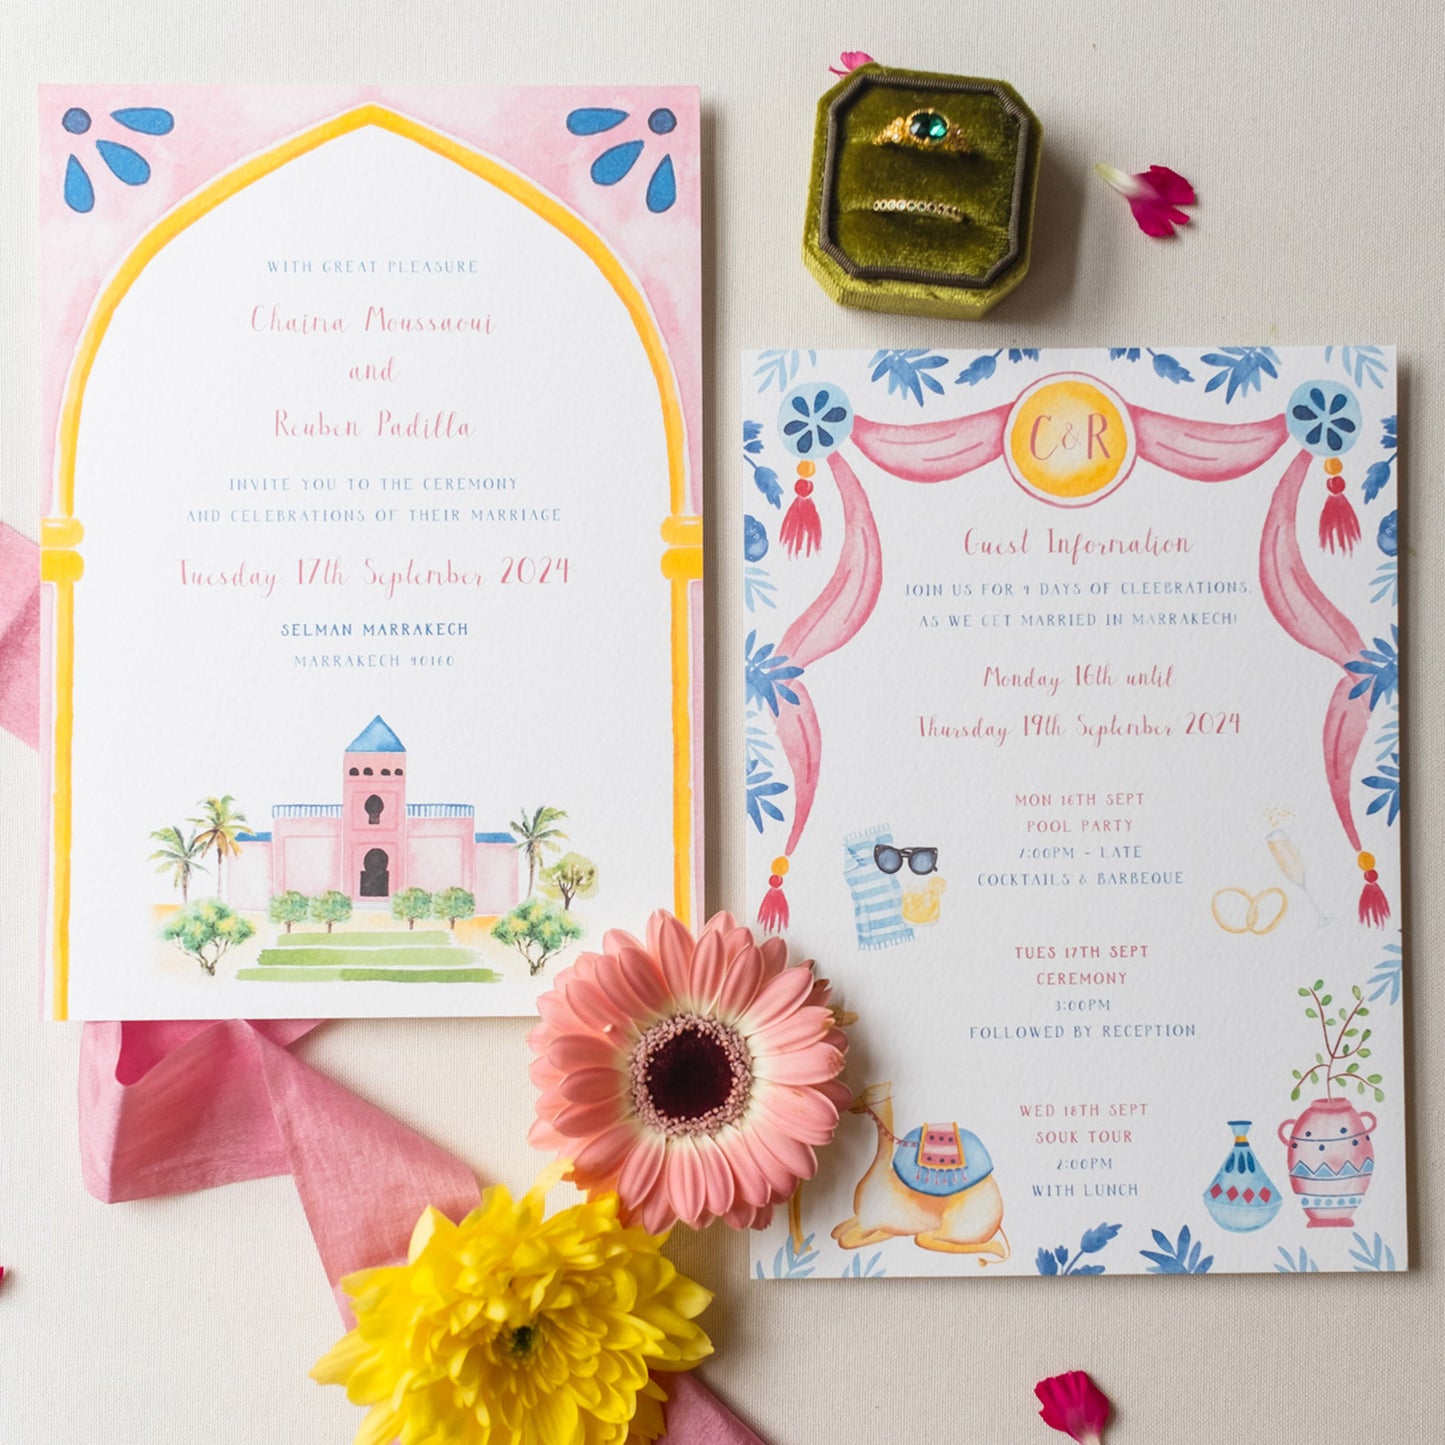 Moroccan Wedding Invitation and Guest Information Card